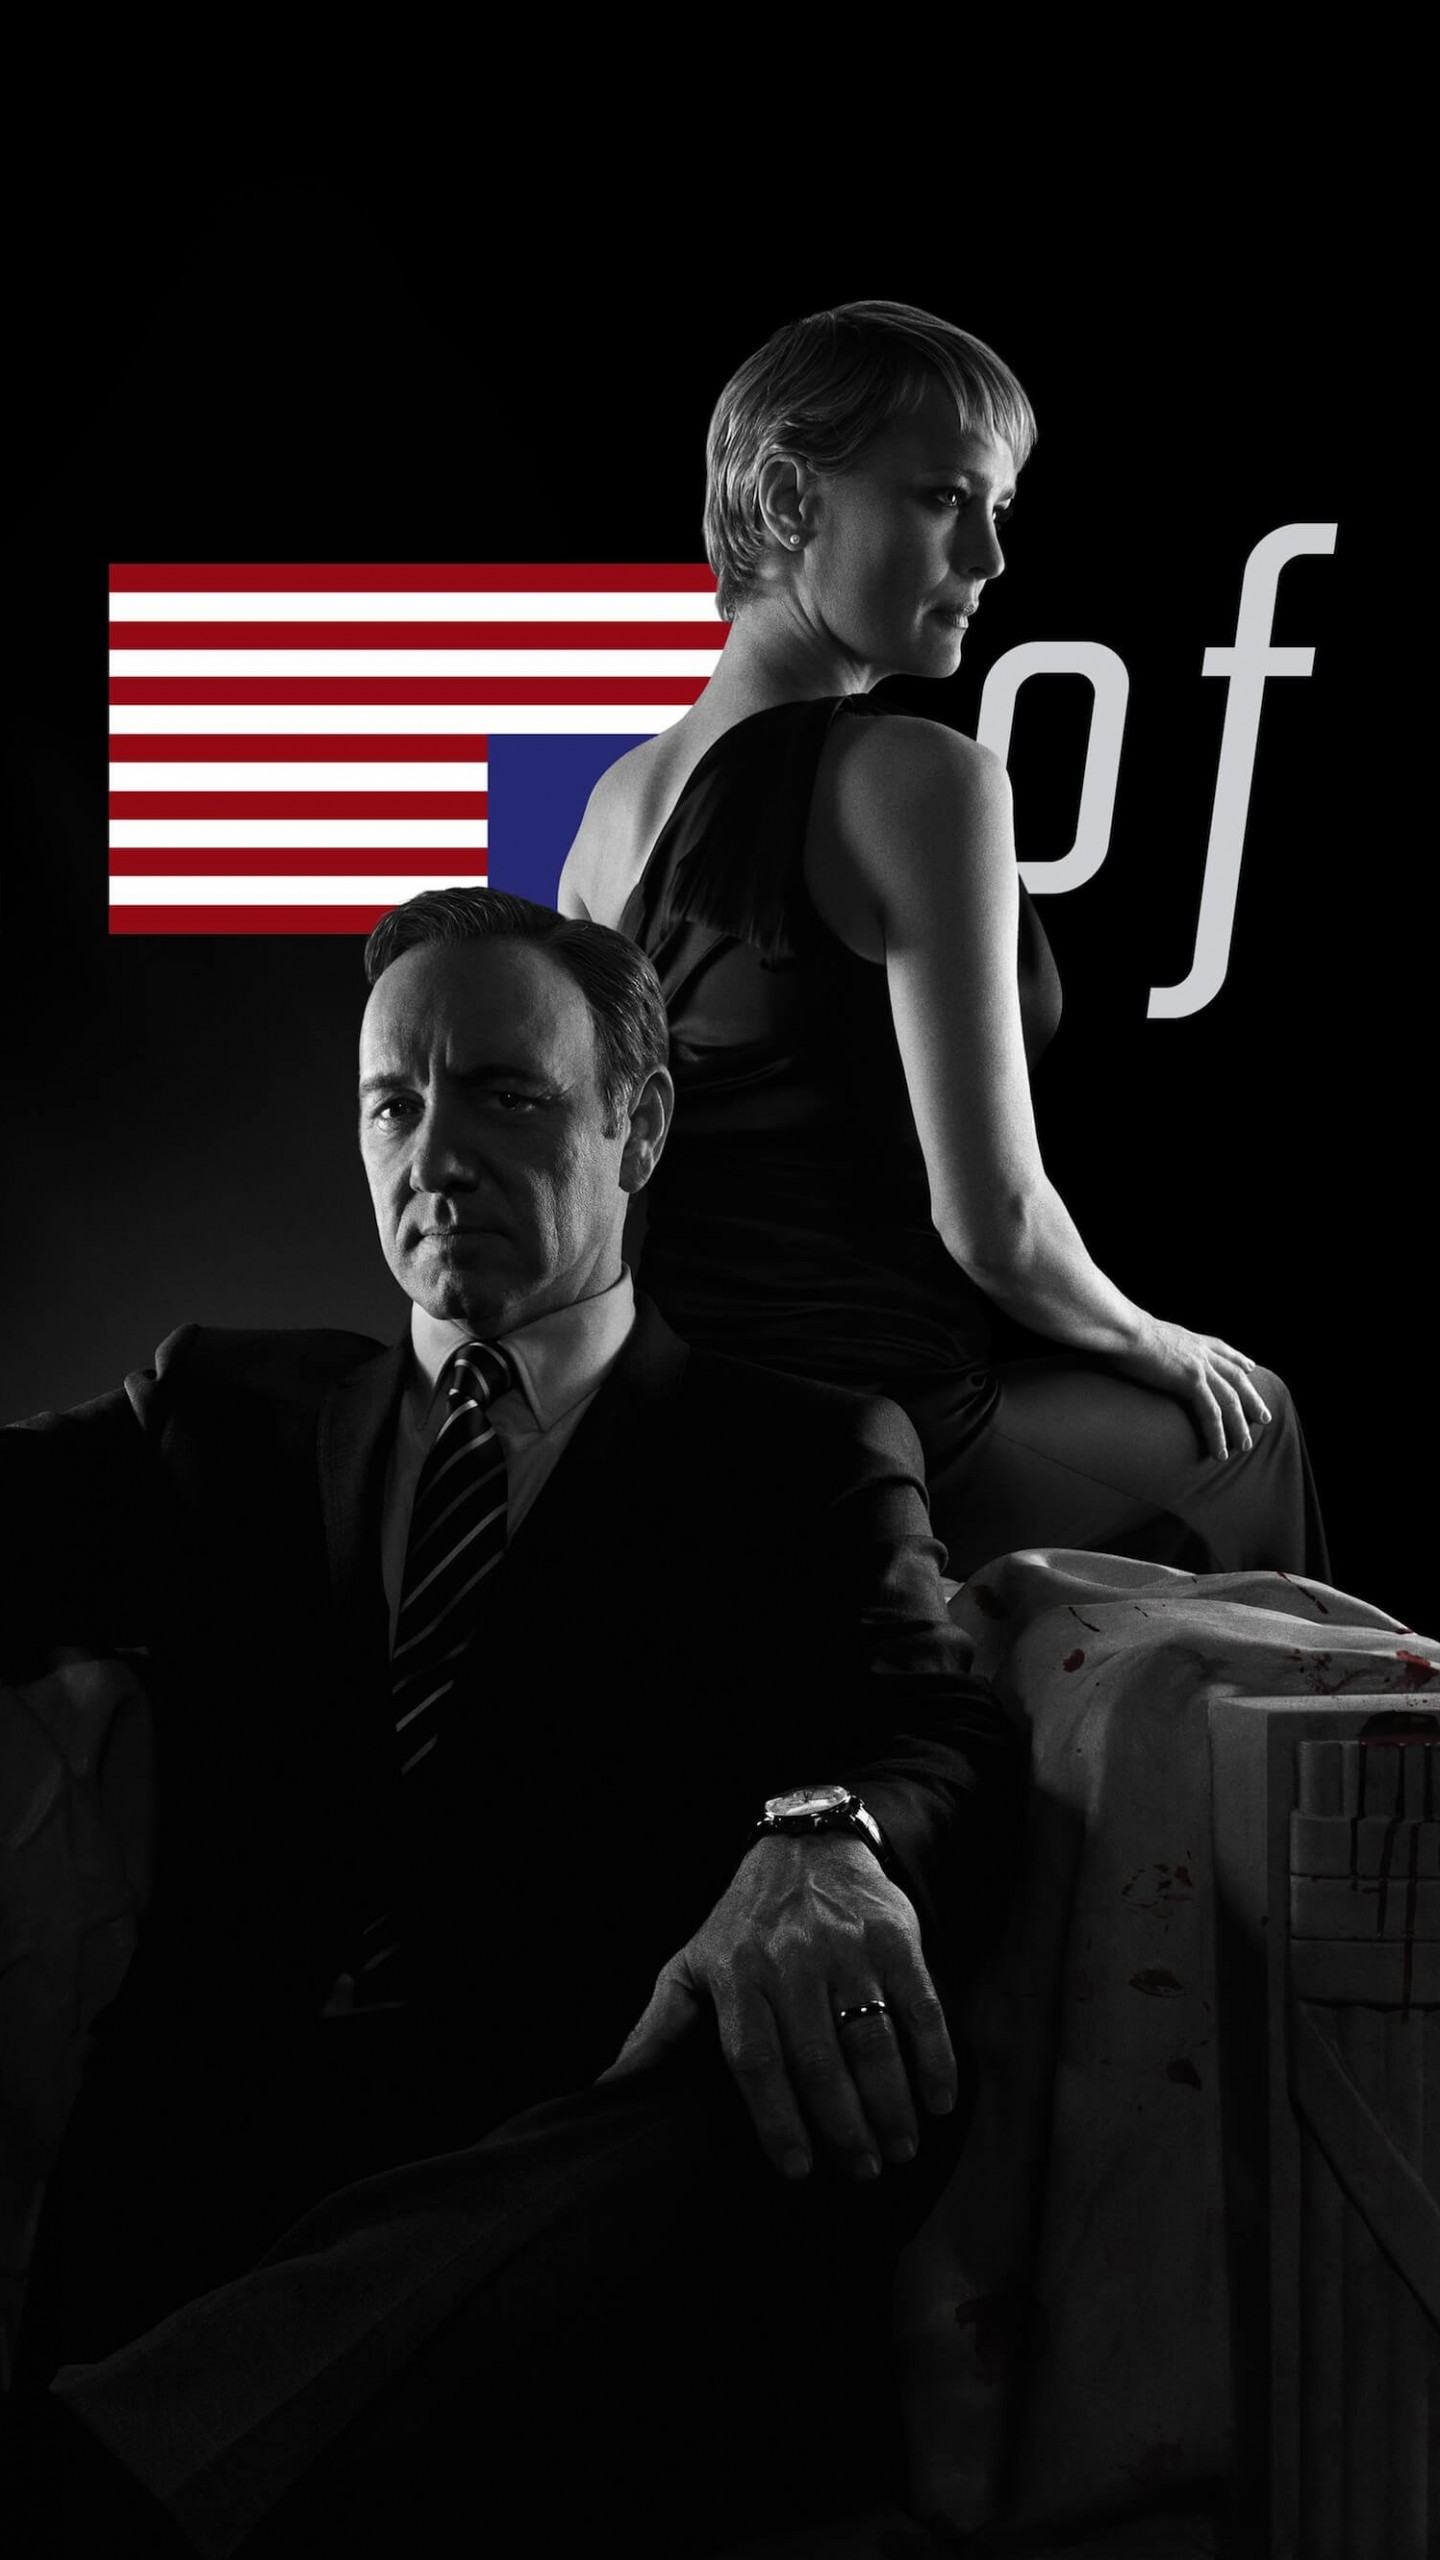 House of Cards - Black & White Wallpaper for SAMSUNG Galaxy Note 4